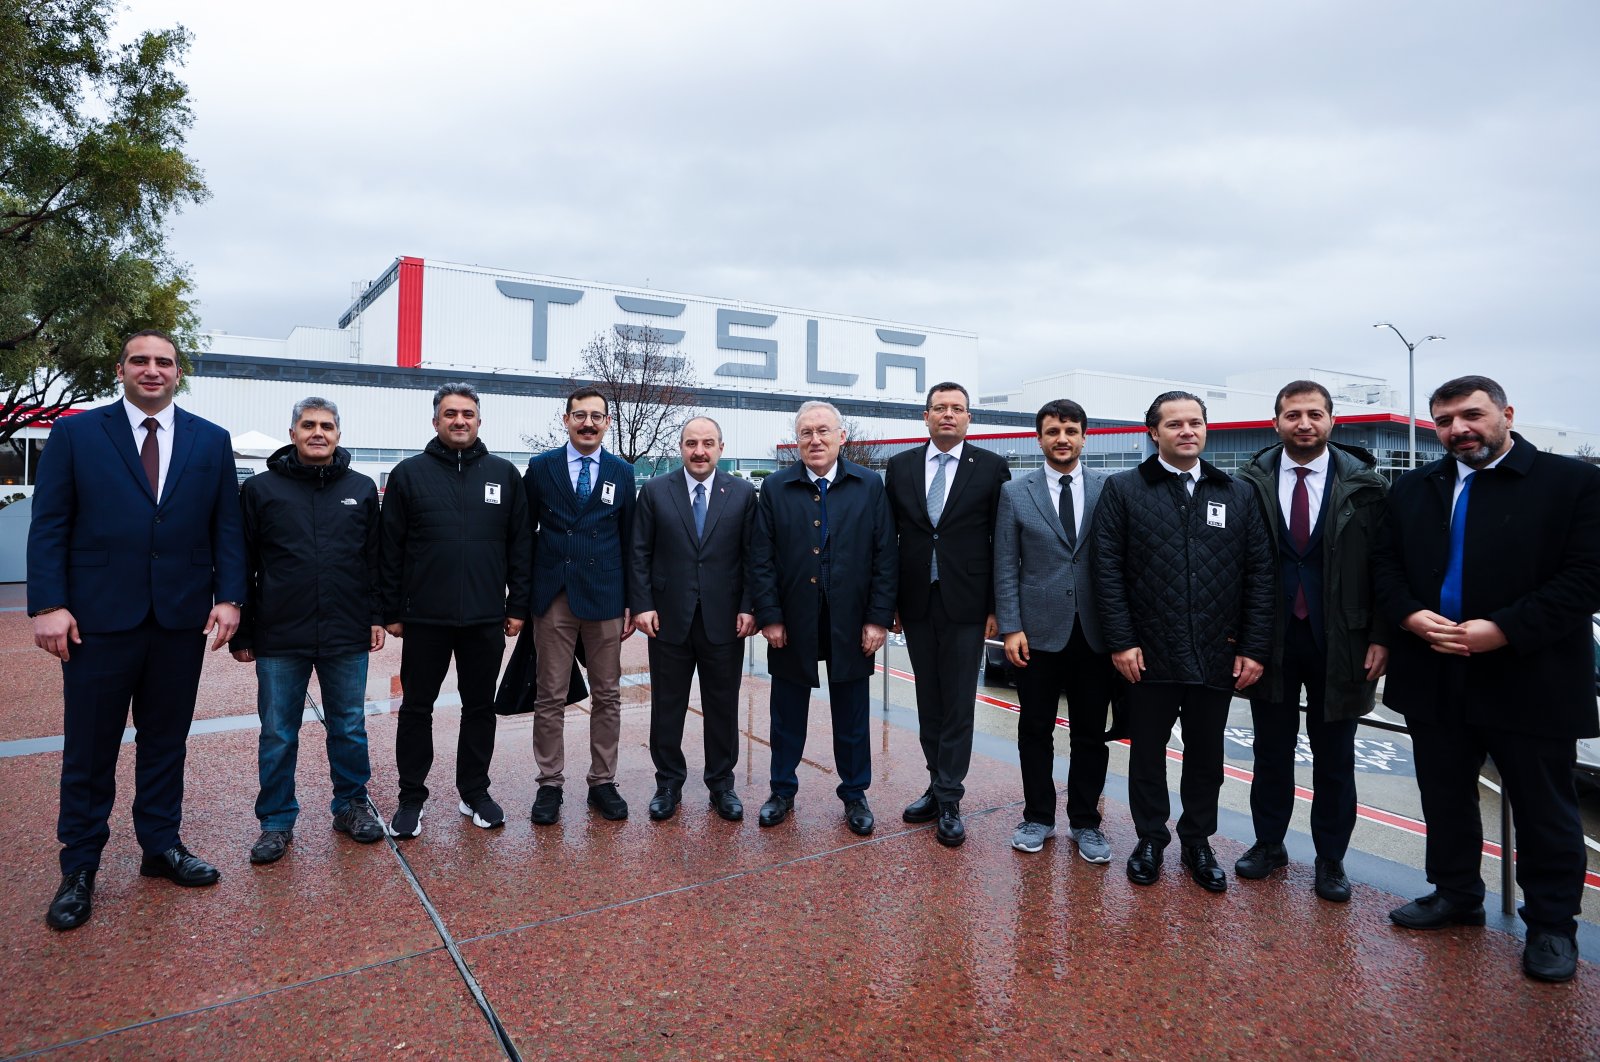 Industry and Technology Minister Mustafa Varank (5th from L) and other officials pose for a photo with the Tesla Fremont Factory in the background, in Fremont, California, U.S., Jan. 10, 2022. (AA Photo)

